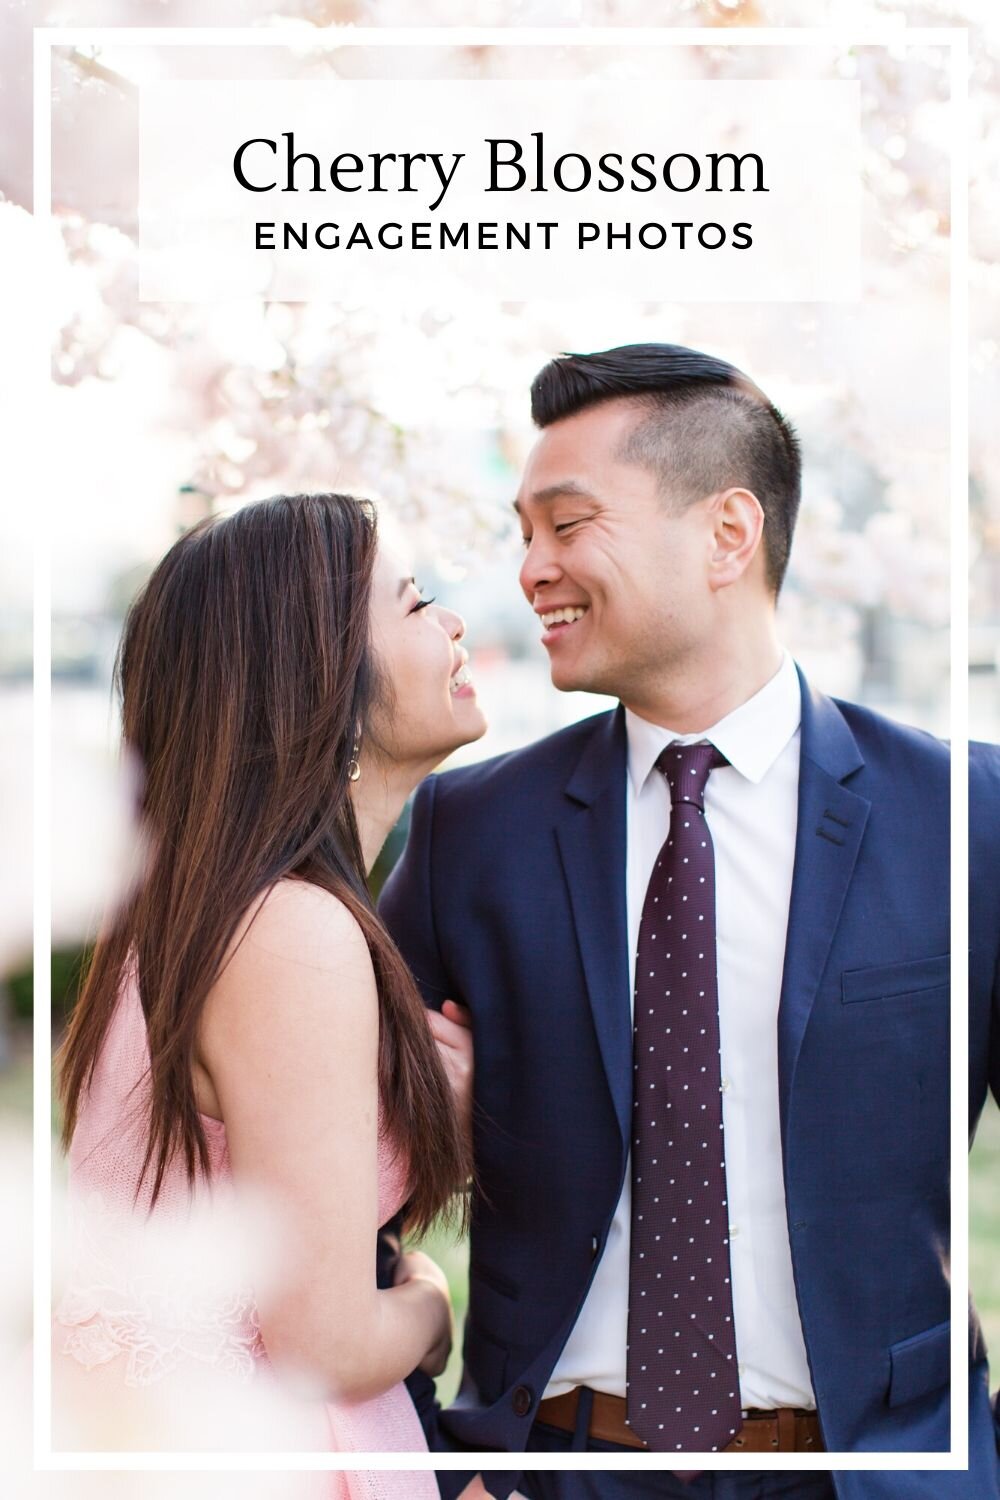 Cherry blossom engagement pictures